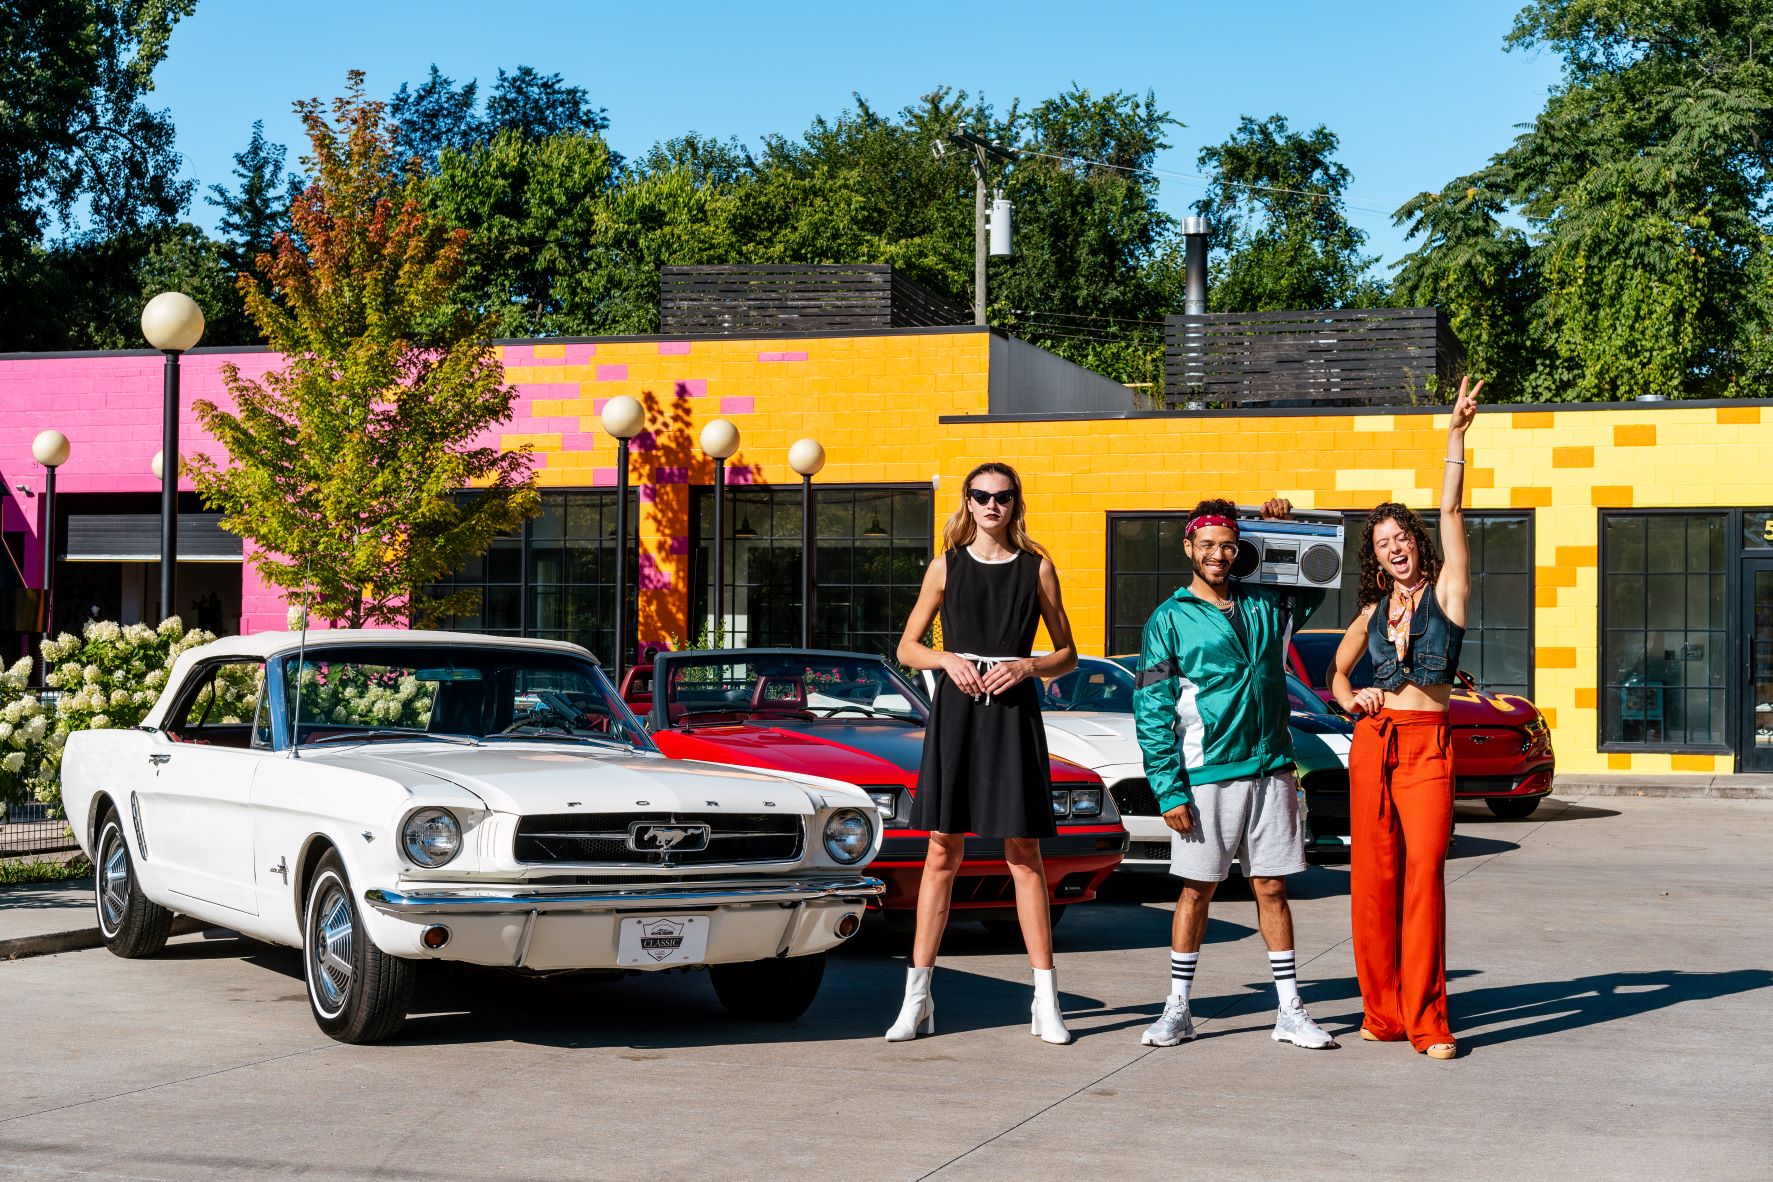 Ford Mustang fans pictured in attire to match the different decades of Ford Mustangs